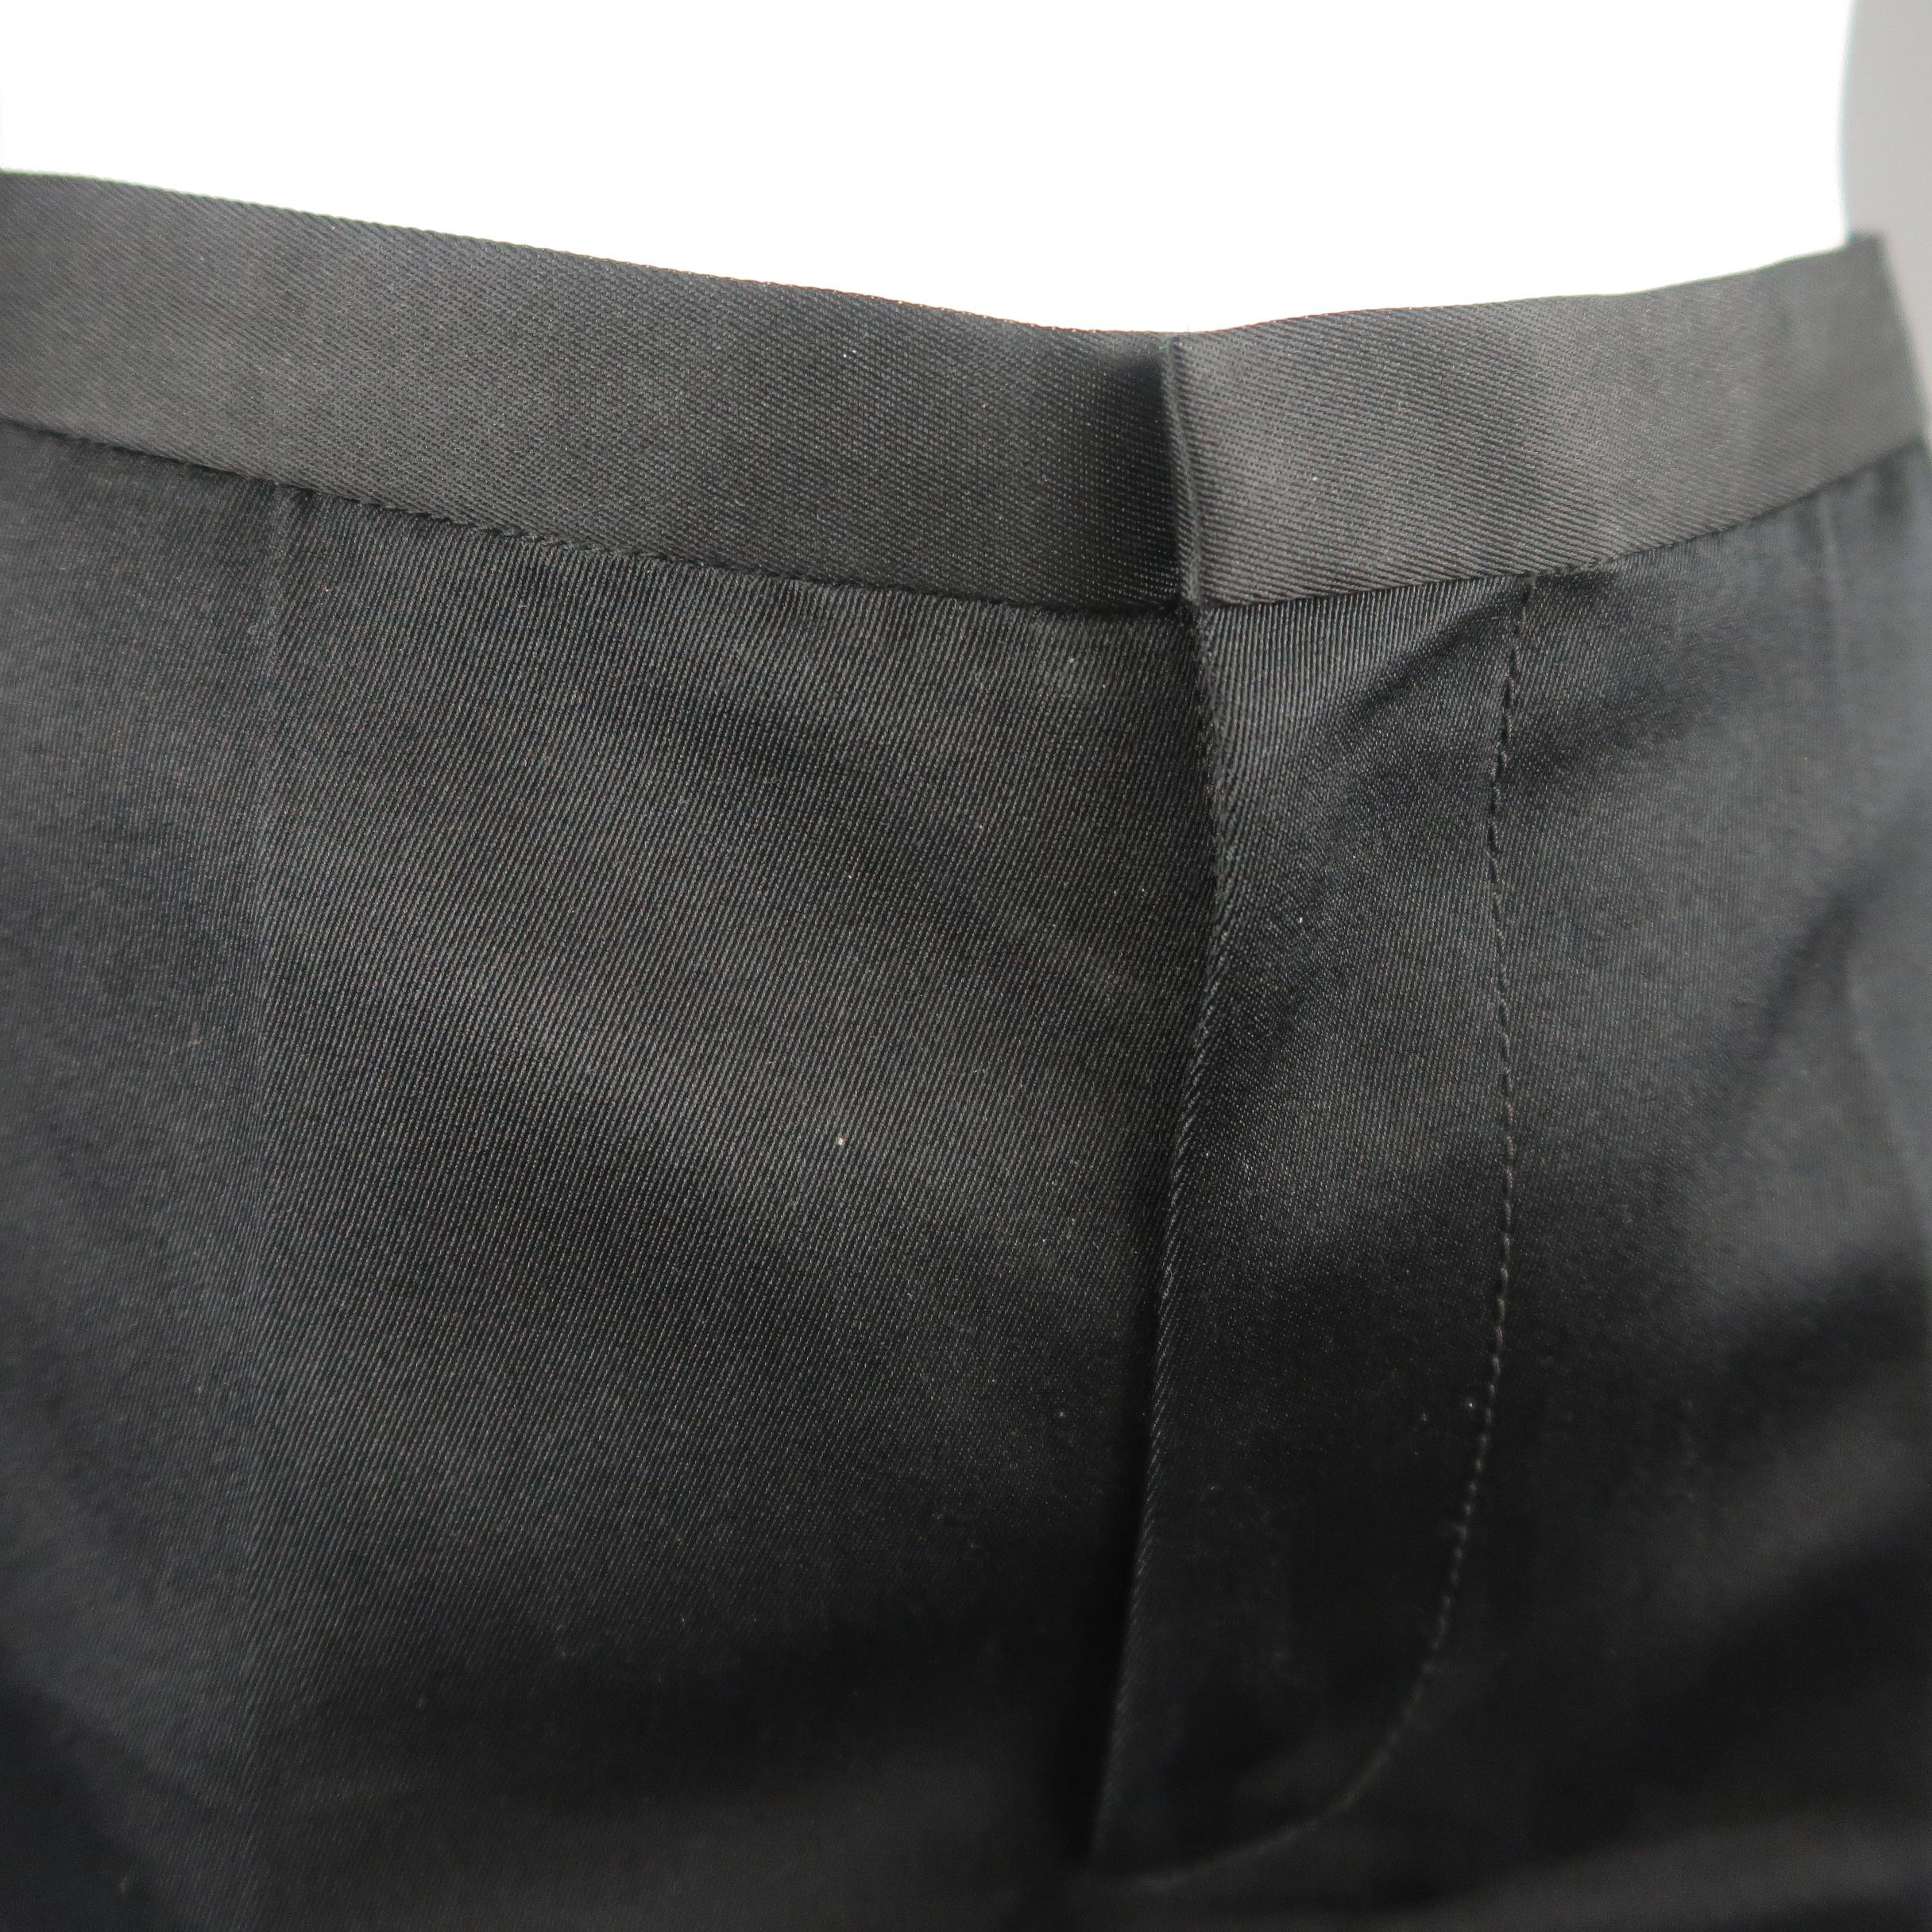 MARC JACOBS dress pants come in structured silk twill with a flat front and tapered leg. Made in USA.
 
Good Pre-Owned Condition.
Marked: (no size)
 
Measurements:
 
Waist: 28 in.
Rise: 9 in.
Inseam: 25 in.